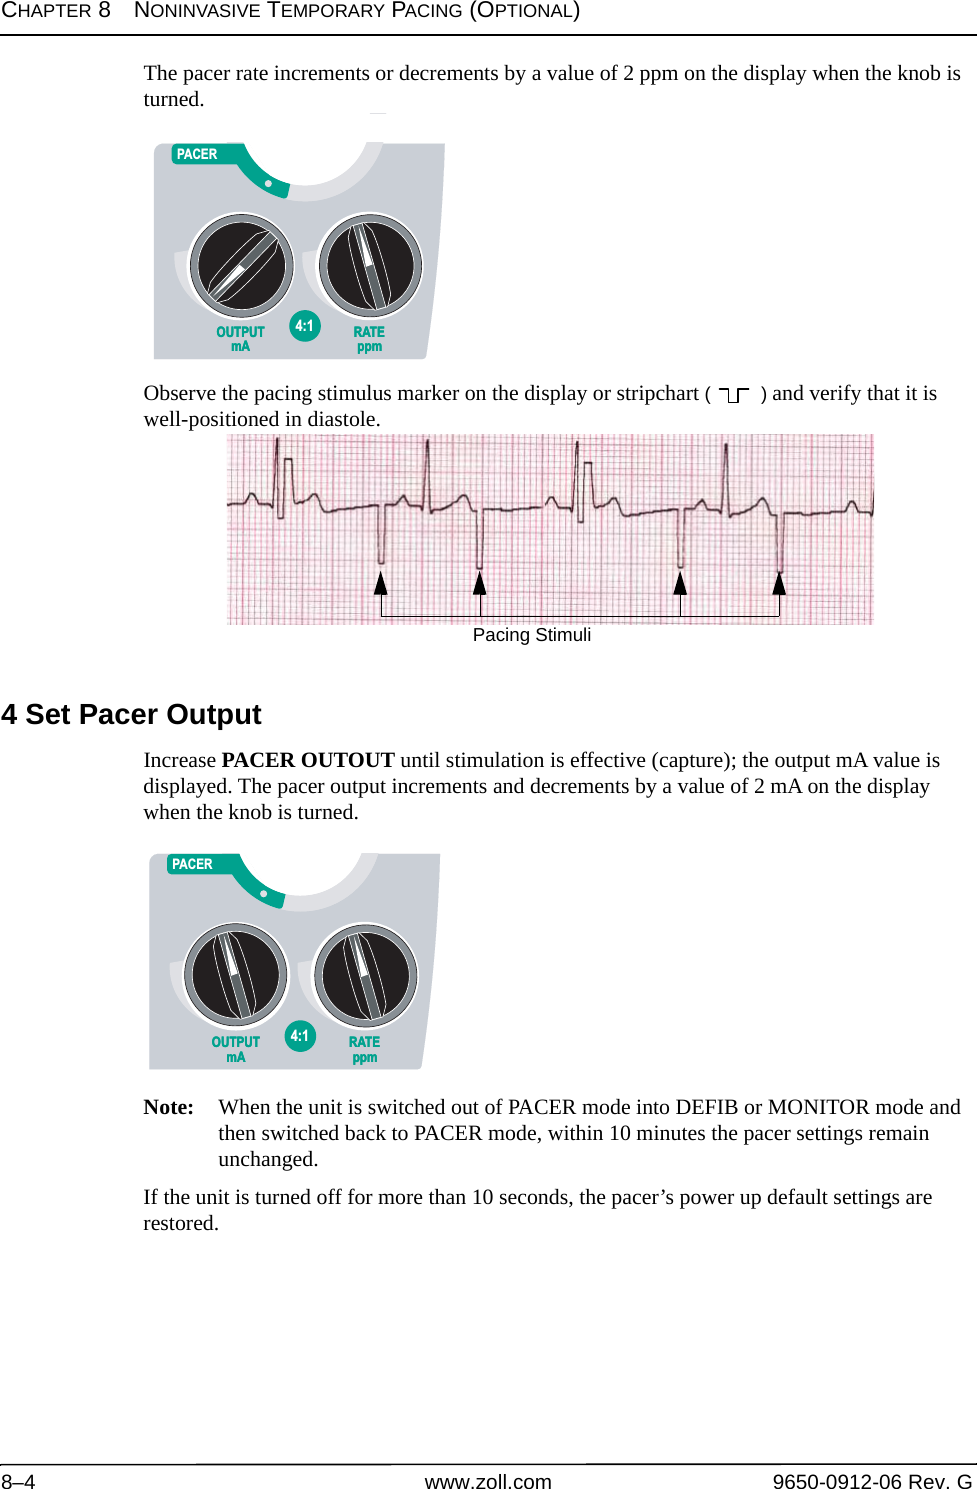 CHAPTER 8NONINVASIVE TEMPORARY PACING (OPTIONAL)8–4 www.zoll.com 9650-0912-06 Rev. GThe pacer rate increments or decrements by a value of 2 ppm on the display when the knob is turned. Observe the pacing stimulus marker on the display or stripchart ( ) and verify that it is well-positioned in diastole. 4 Set Pacer OutputIncrease PACER OUTOUT until stimulation is effective (capture); the output mA value is displayed. The pacer output increments and decrements by a value of 2 mA on the display when the knob is turned.Note: When the unit is switched out of PACER mode into DEFIB or MONITOR mode and then switched back to PACER mode, within 10 minutes the pacer settings remain unchanged. If the unit is turned off for more than 10 seconds, the pacer’s power up default settings are restored. OUTPUTmAOUTPUTmARATEppmRATEppm4:1OFFPACERPacing StimuliOUTPUTmAOUTPUTmARATEppmRATEppm4:1OFFPACER